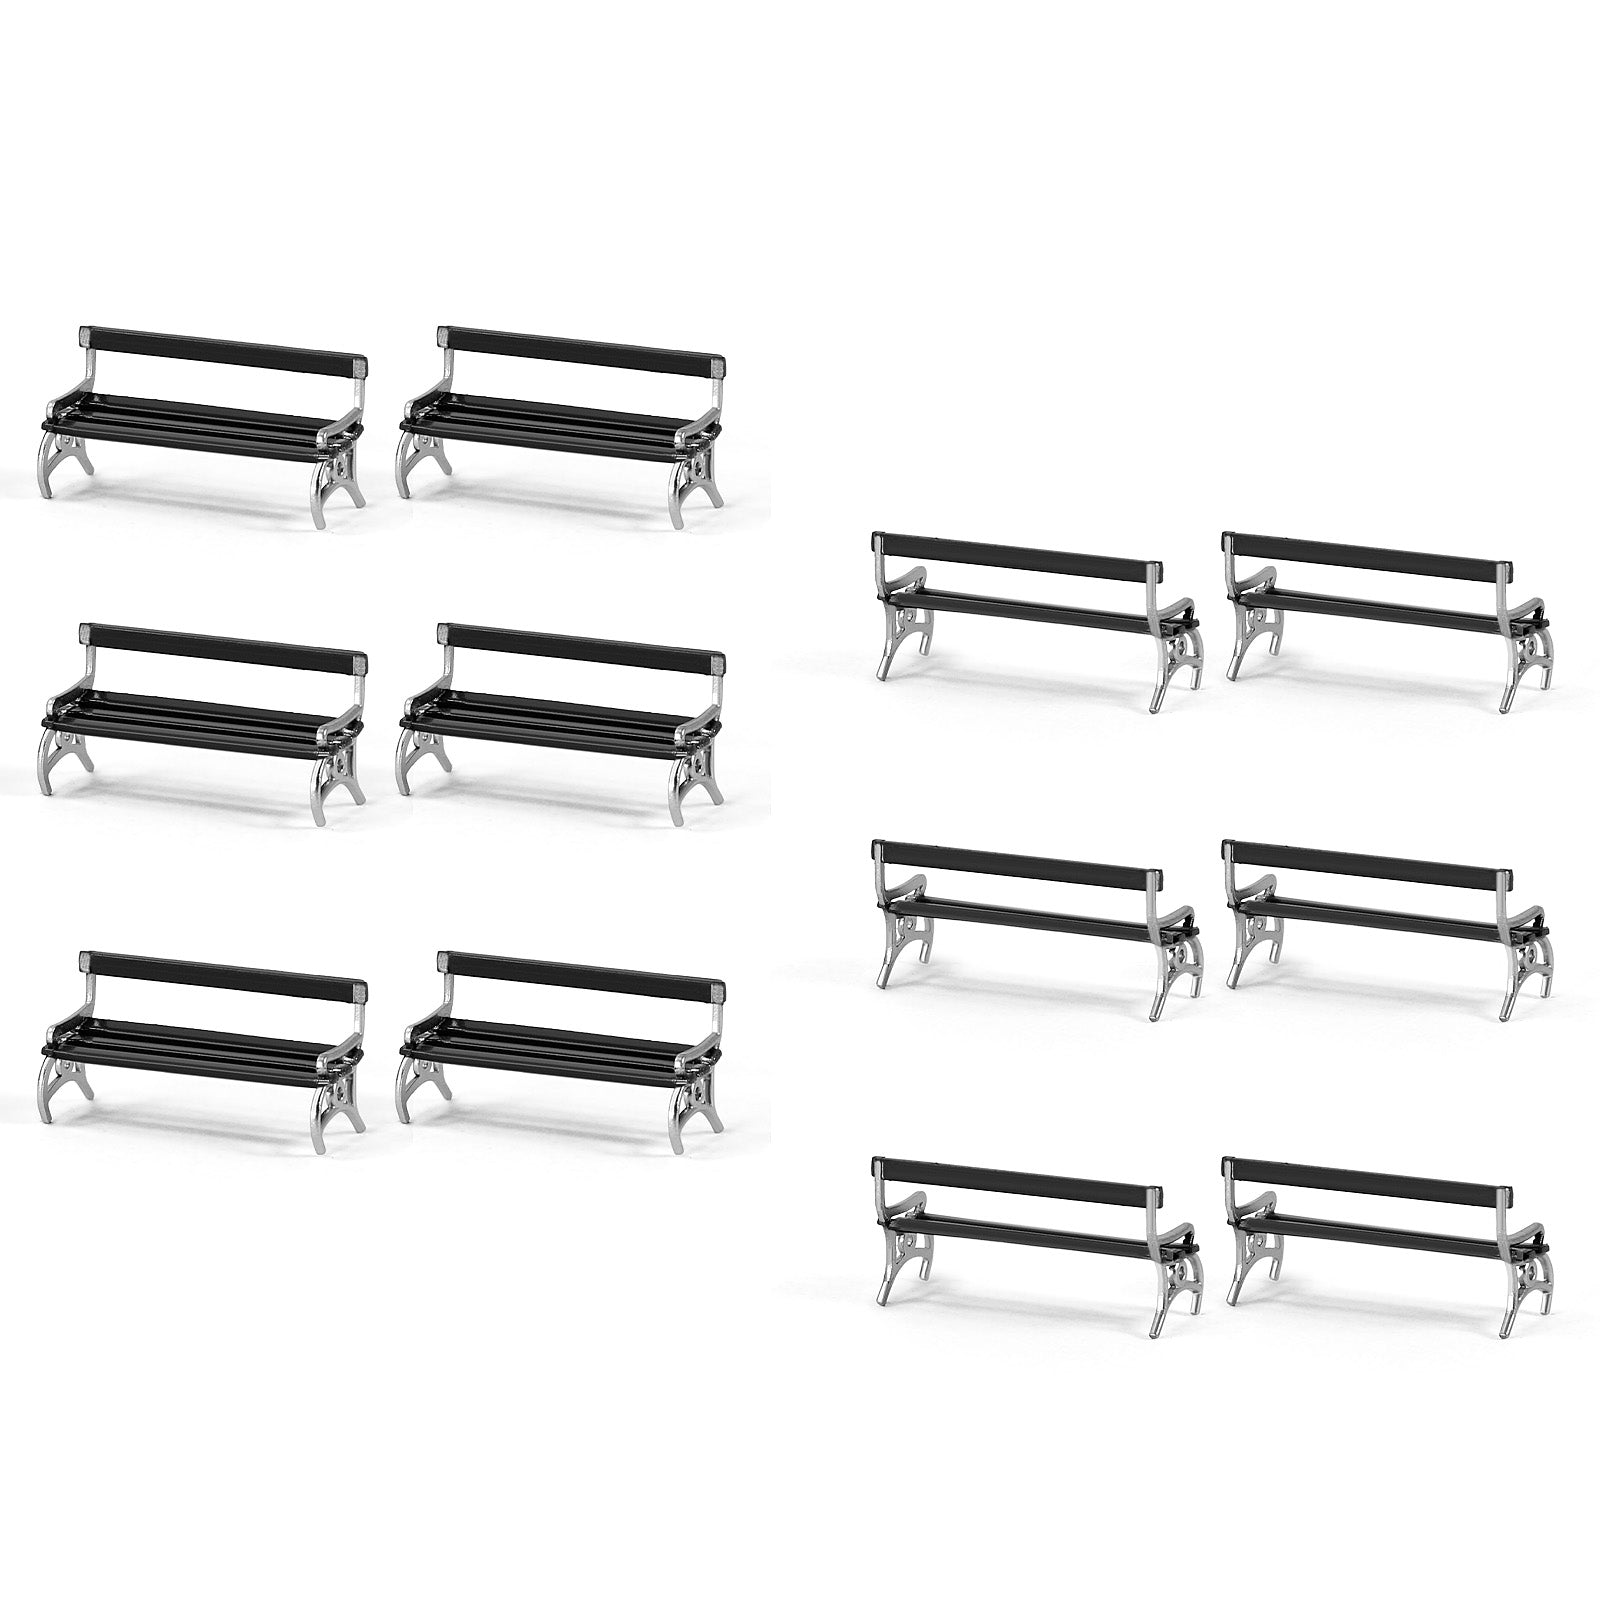 ZY37087 12pcs HO Scale 1:87 Garden Park Benches Street Platform Station Chairs